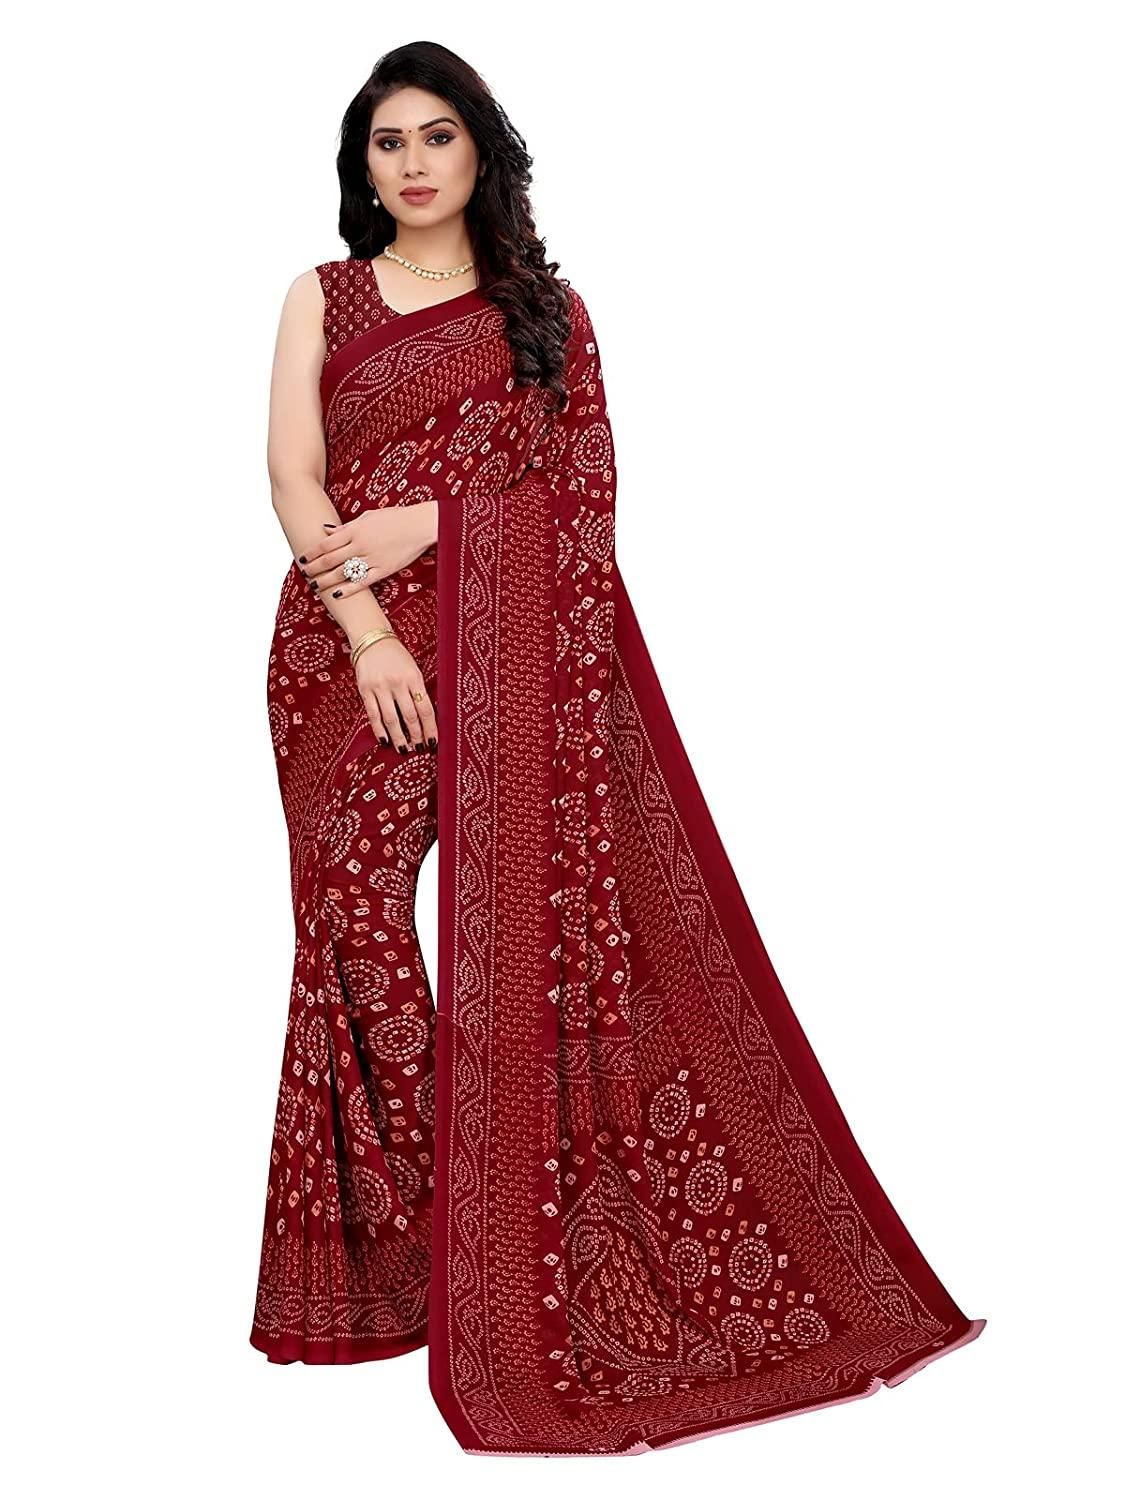 Elegant Printed Georgette Saree For Women - 5.5 mtr / Red - Shopaholics